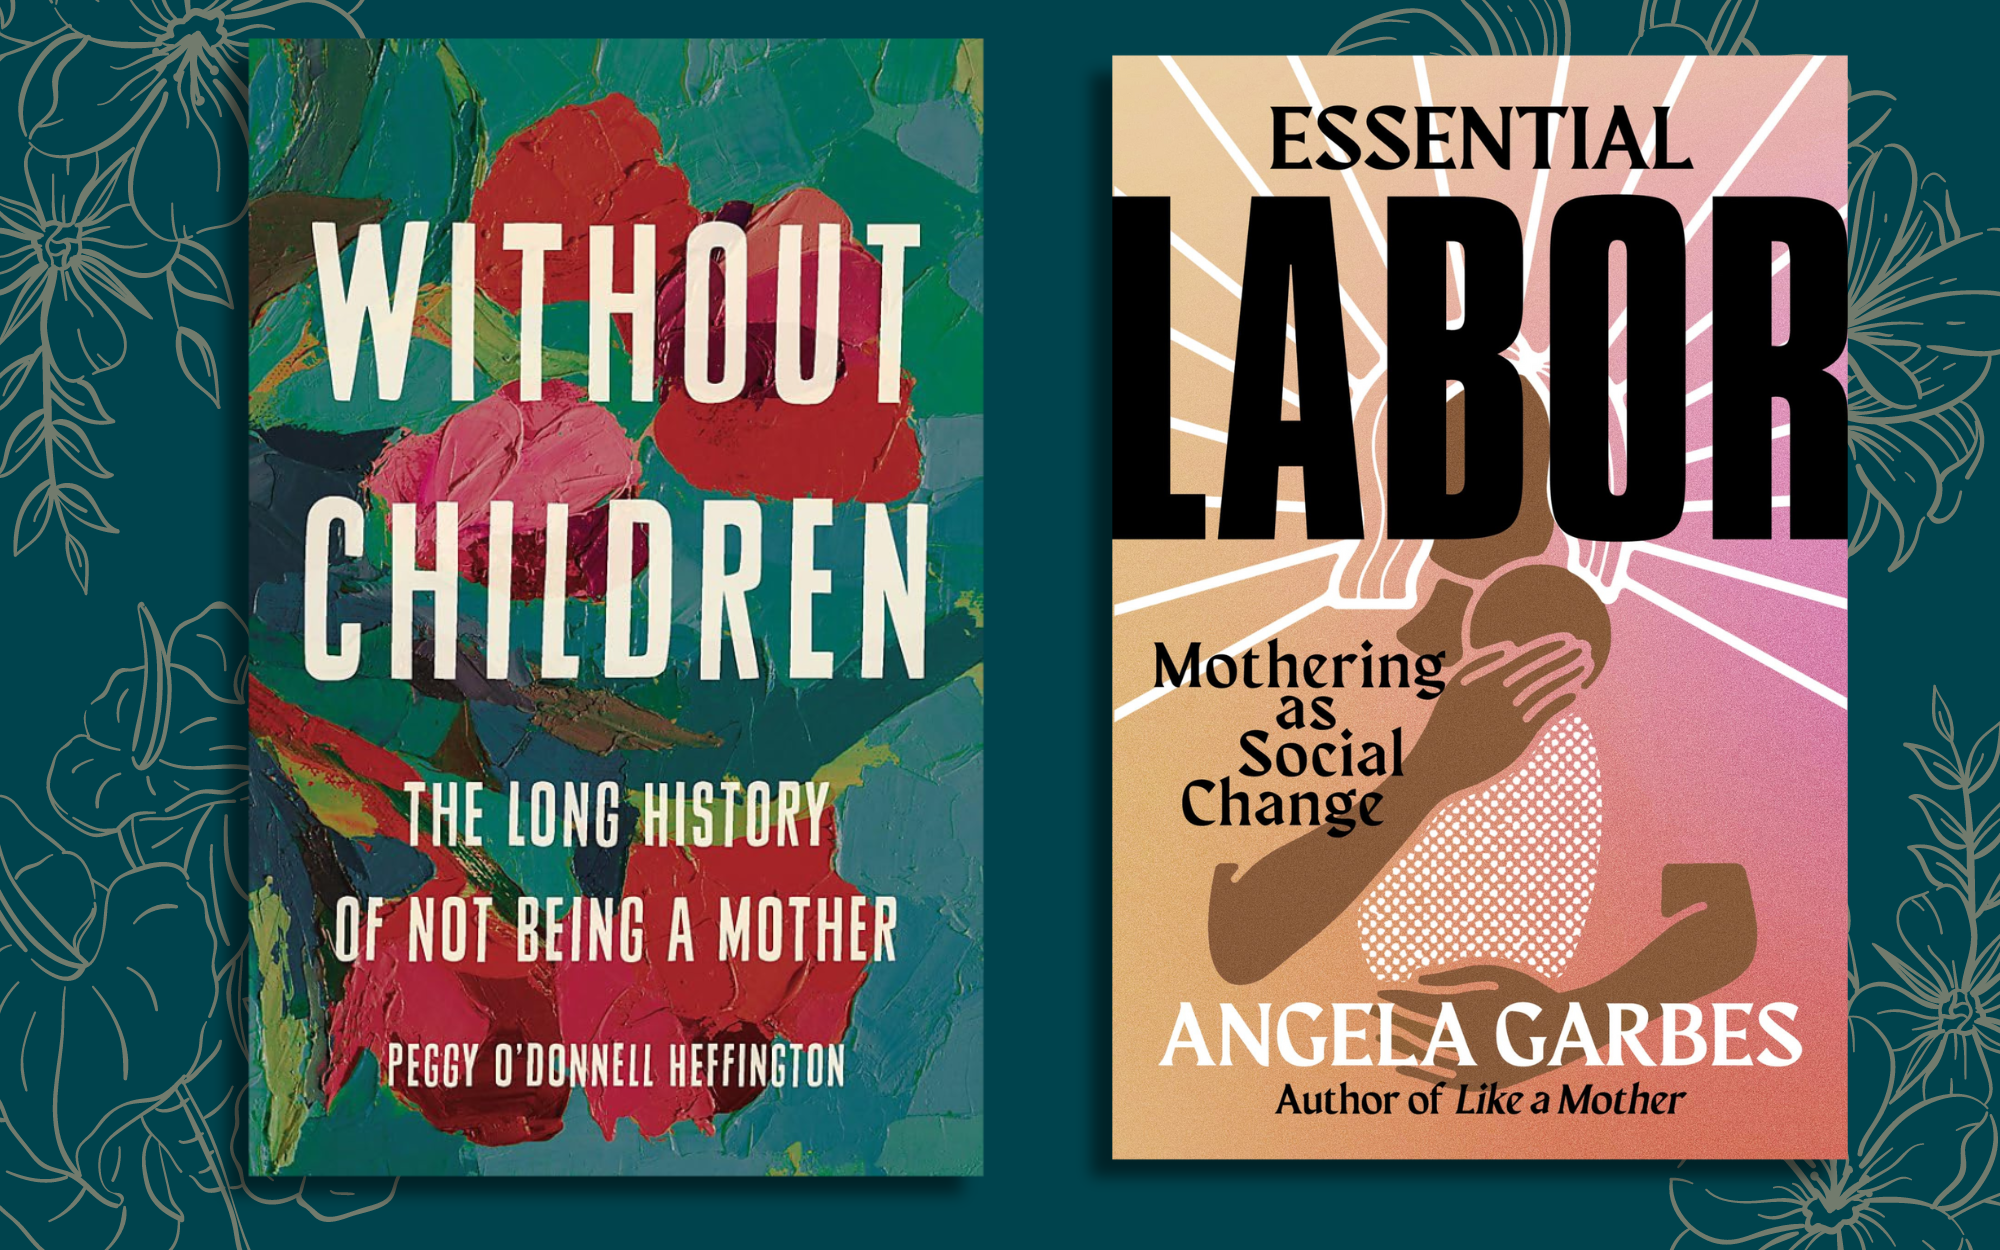 The Politics of Care: On Angela Garbes’s “Essential Labor” and Peggy O’Donnell Heffington’s “Without Children”